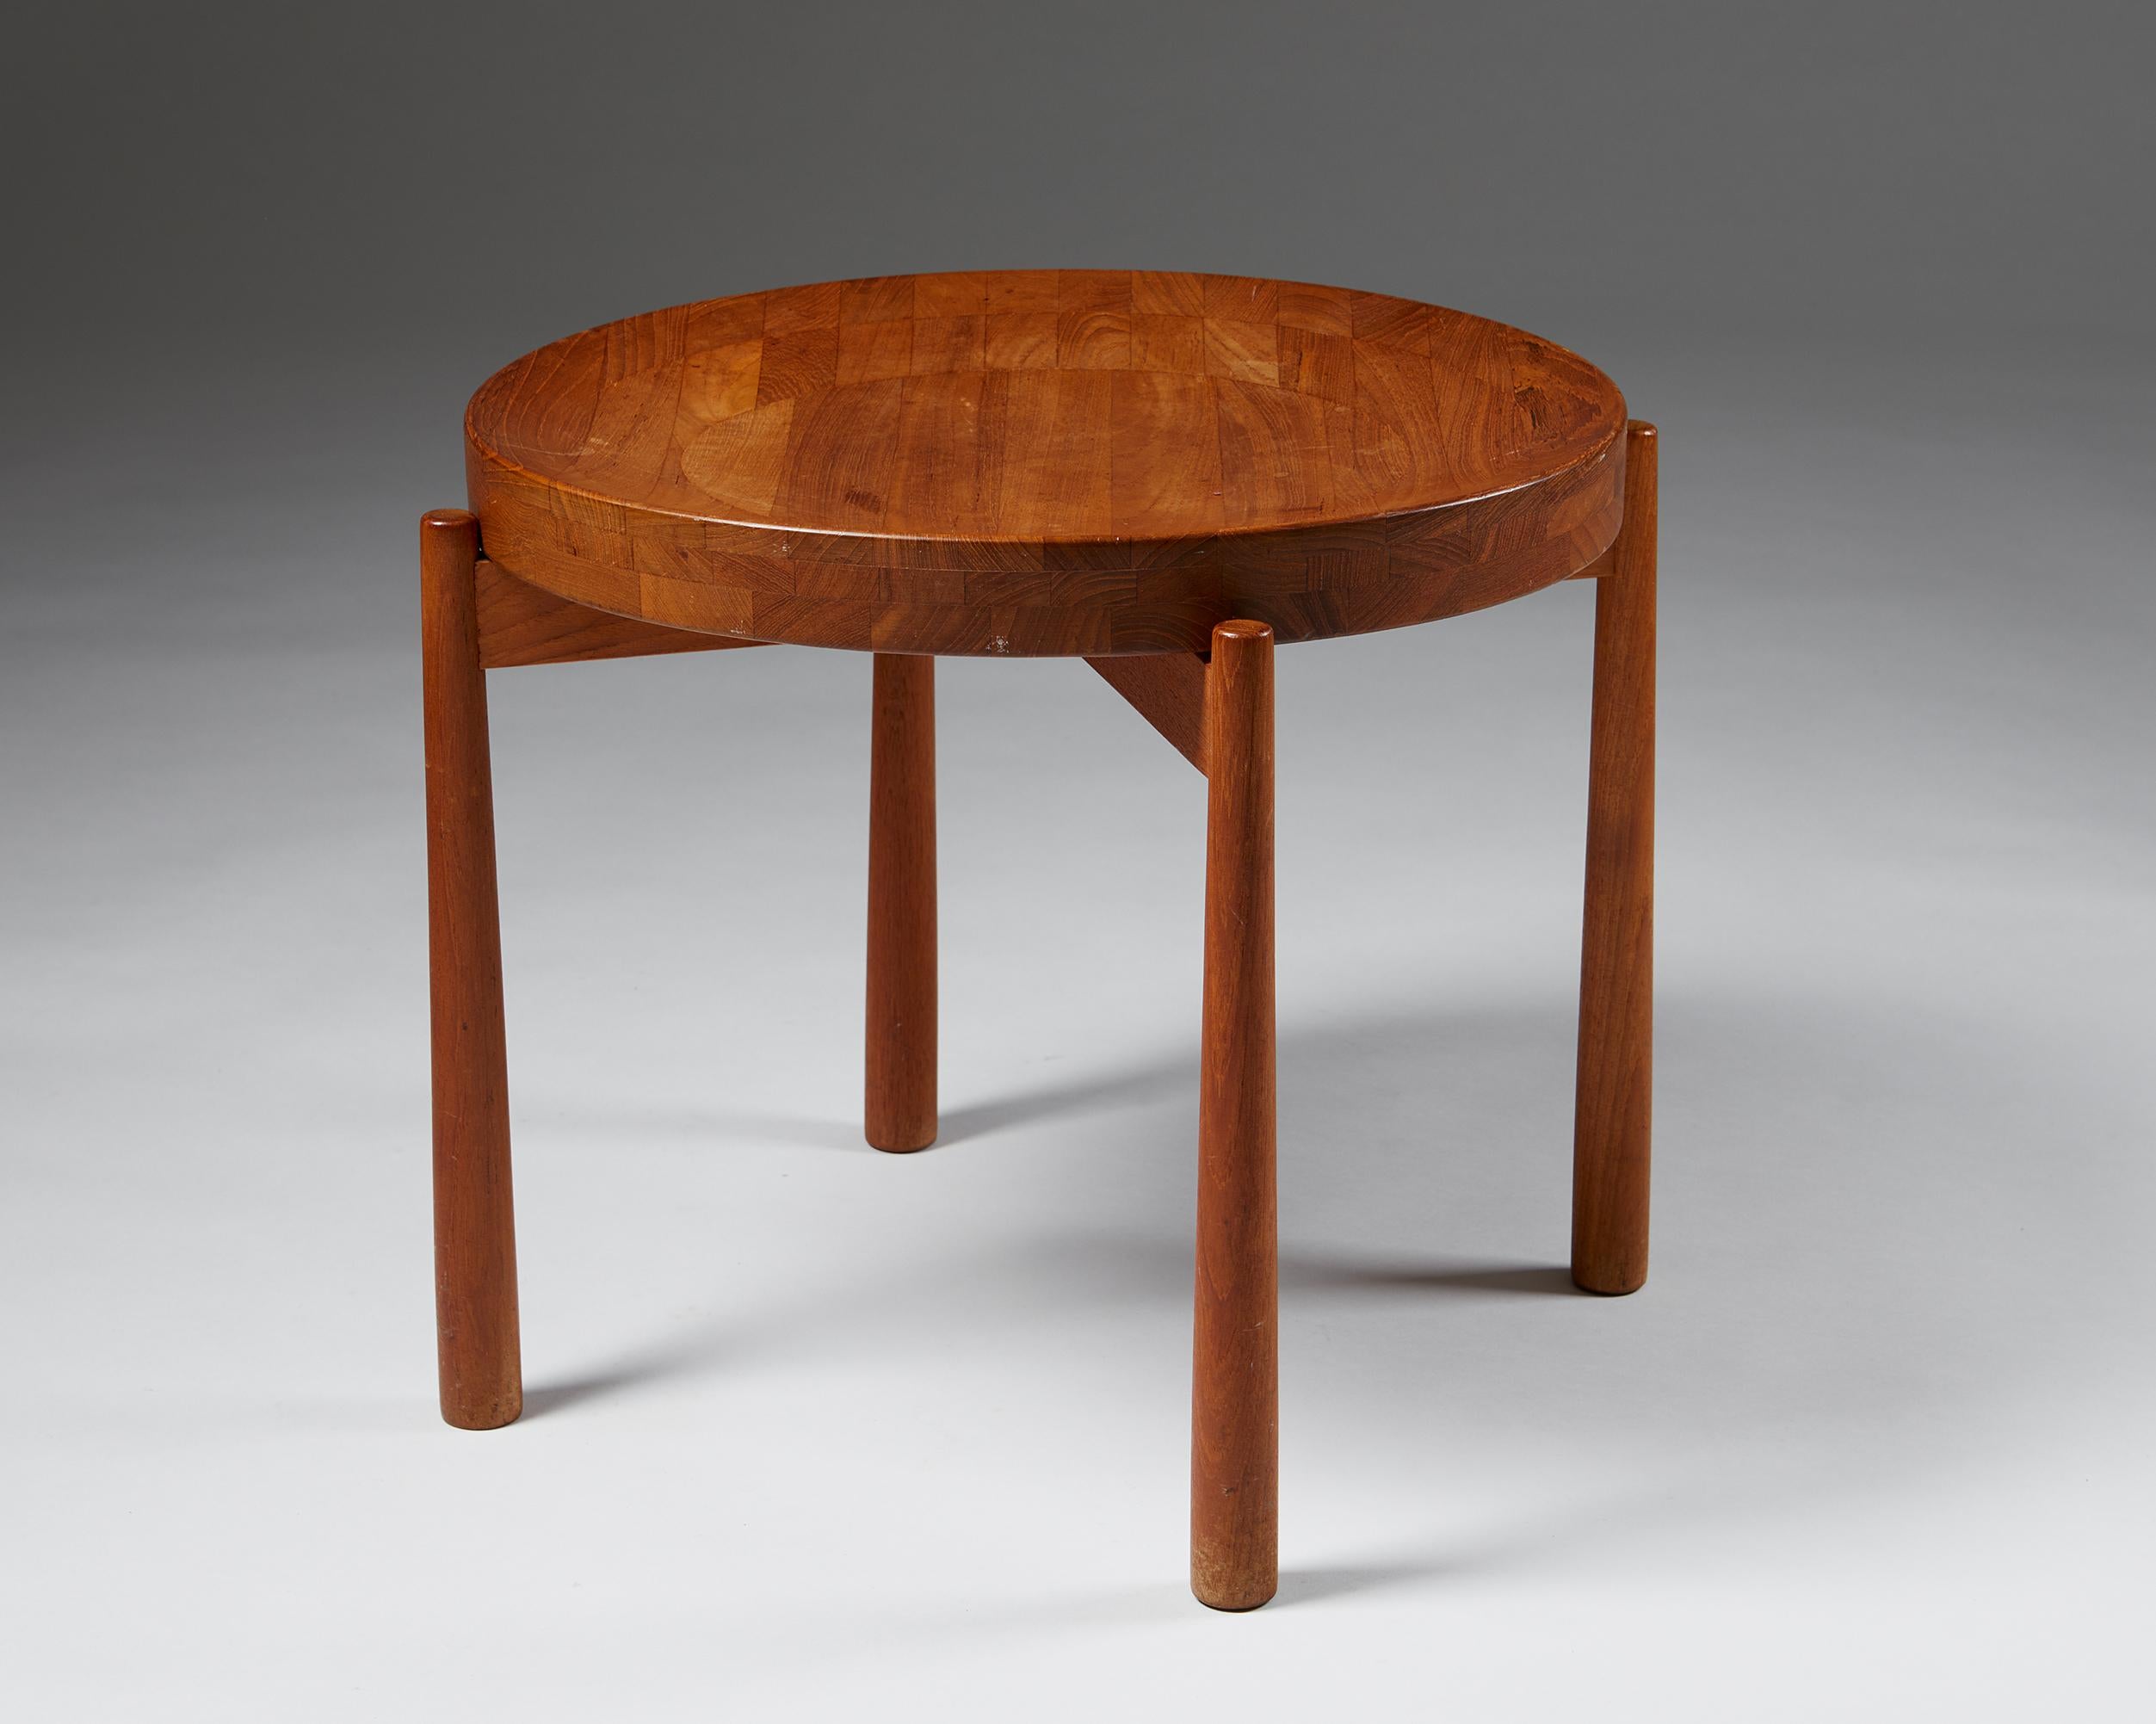 Side table designed by Jens Harald Quistgaard,
Denmark, 1950s

Teak. 

Dimensions
H: 44 cm / 17 ¼’’
W: 49.5 cm / 19 ½’’
D: 49.5 cm / 19 ½’’.
 
Exquisite woodwork and a beautifully shaped, removable tray surface that can function as a bowl